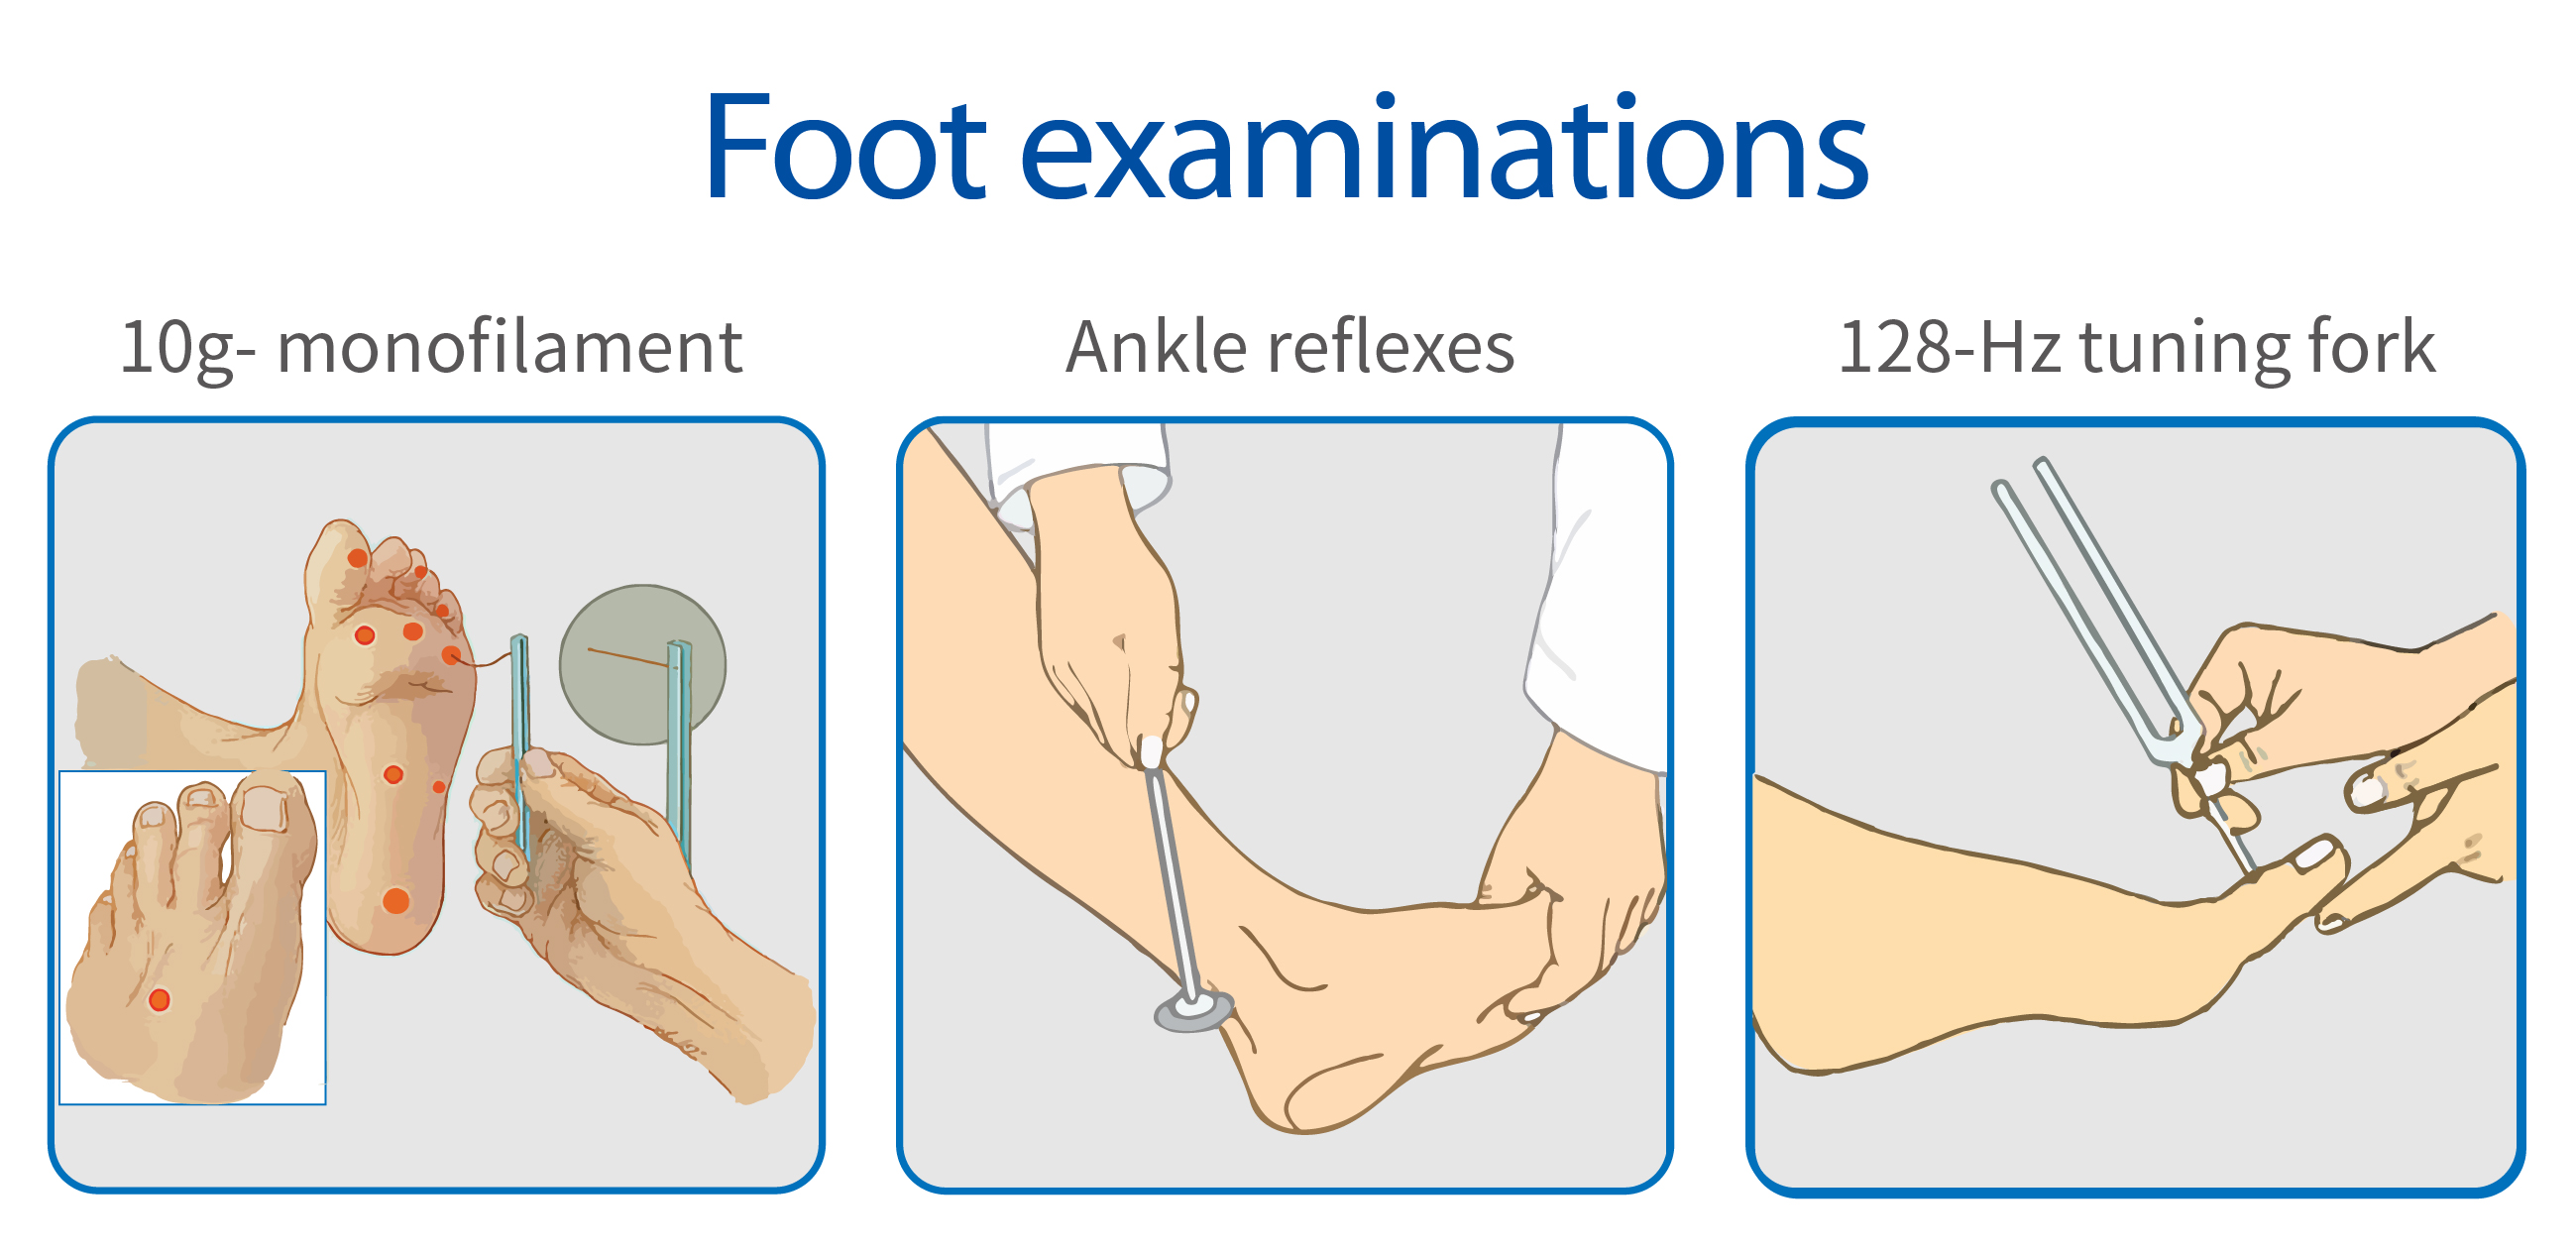 Have You Performed Foot Examinations